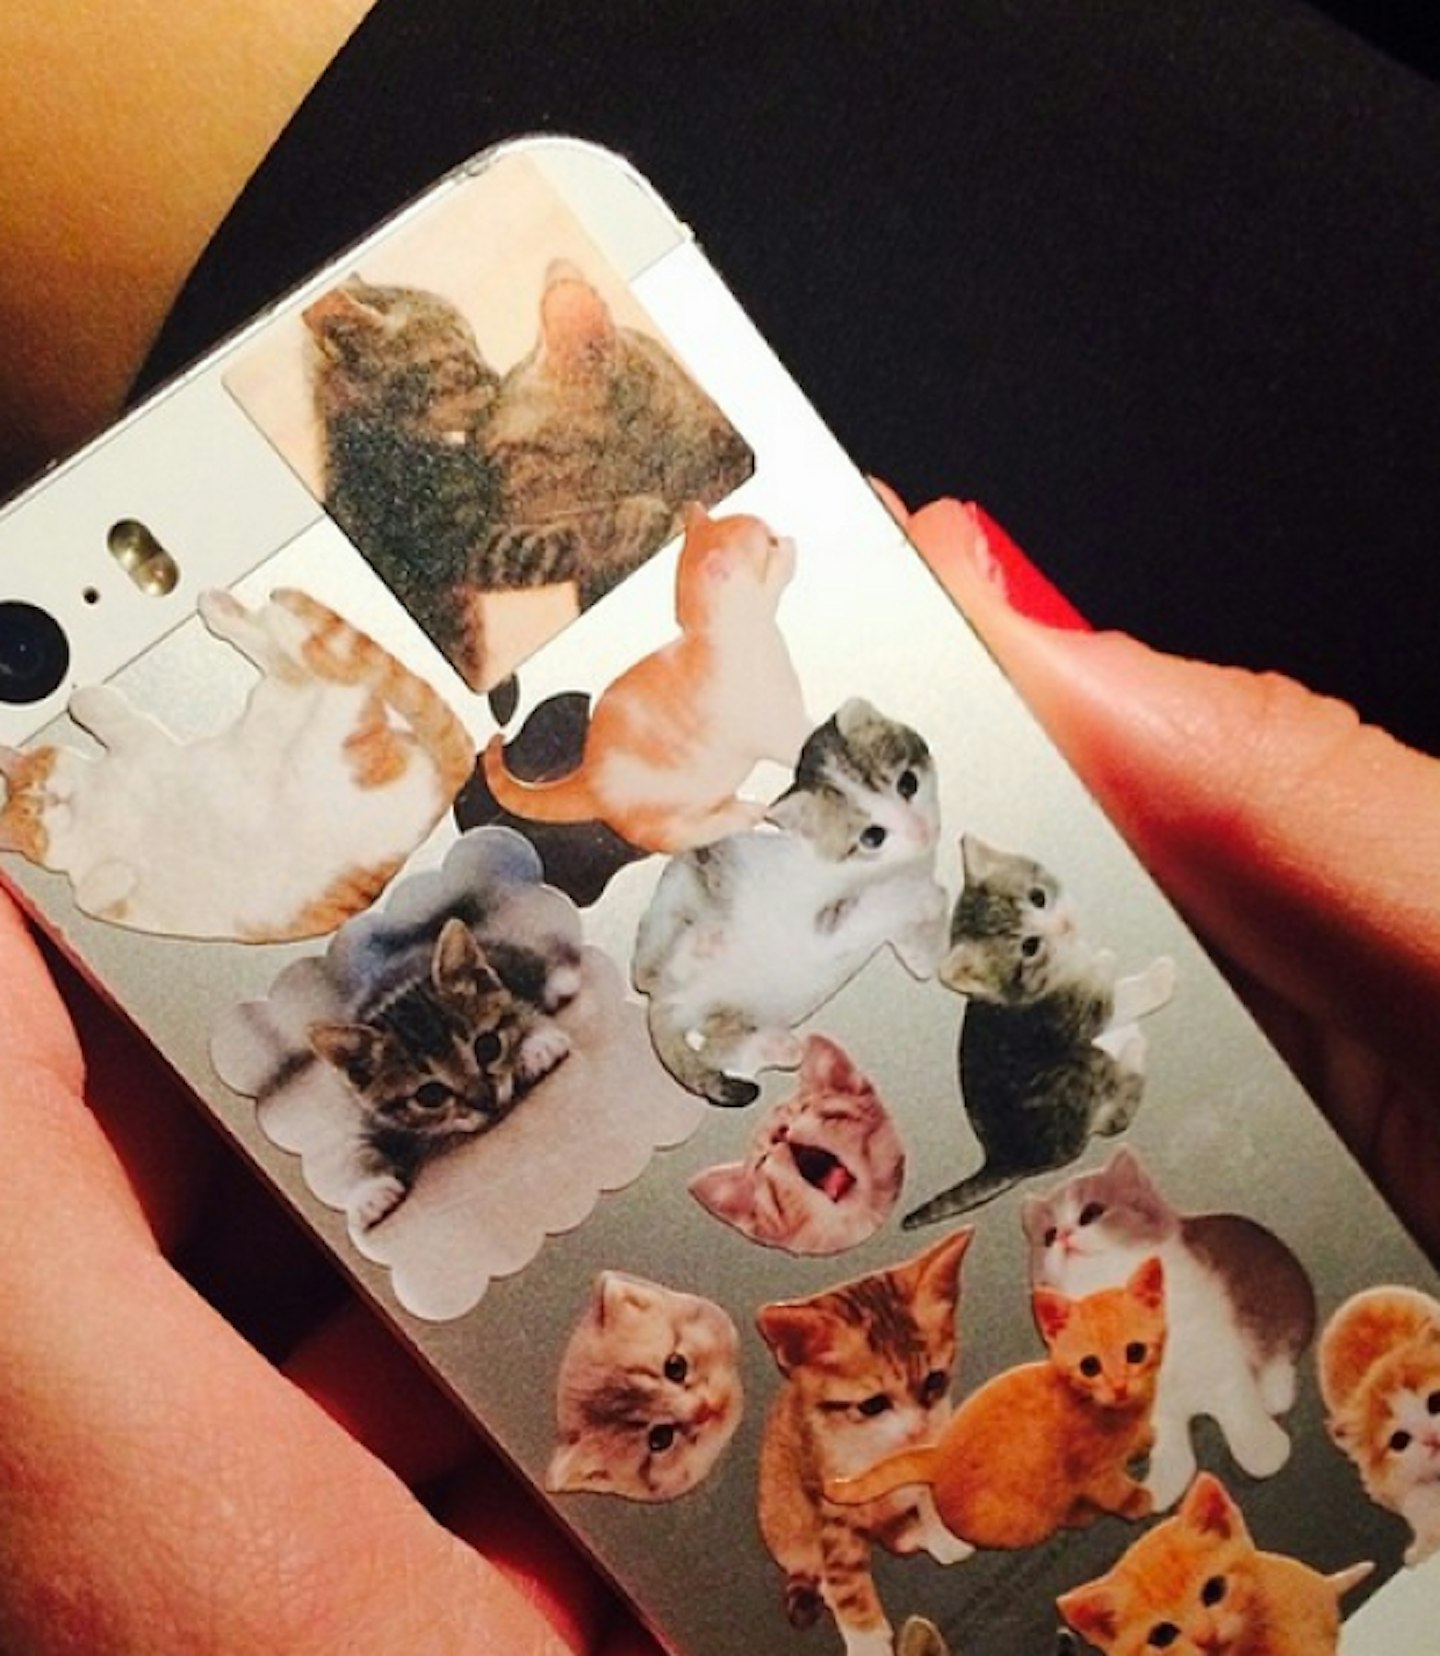 She has the best taste in phone covers...